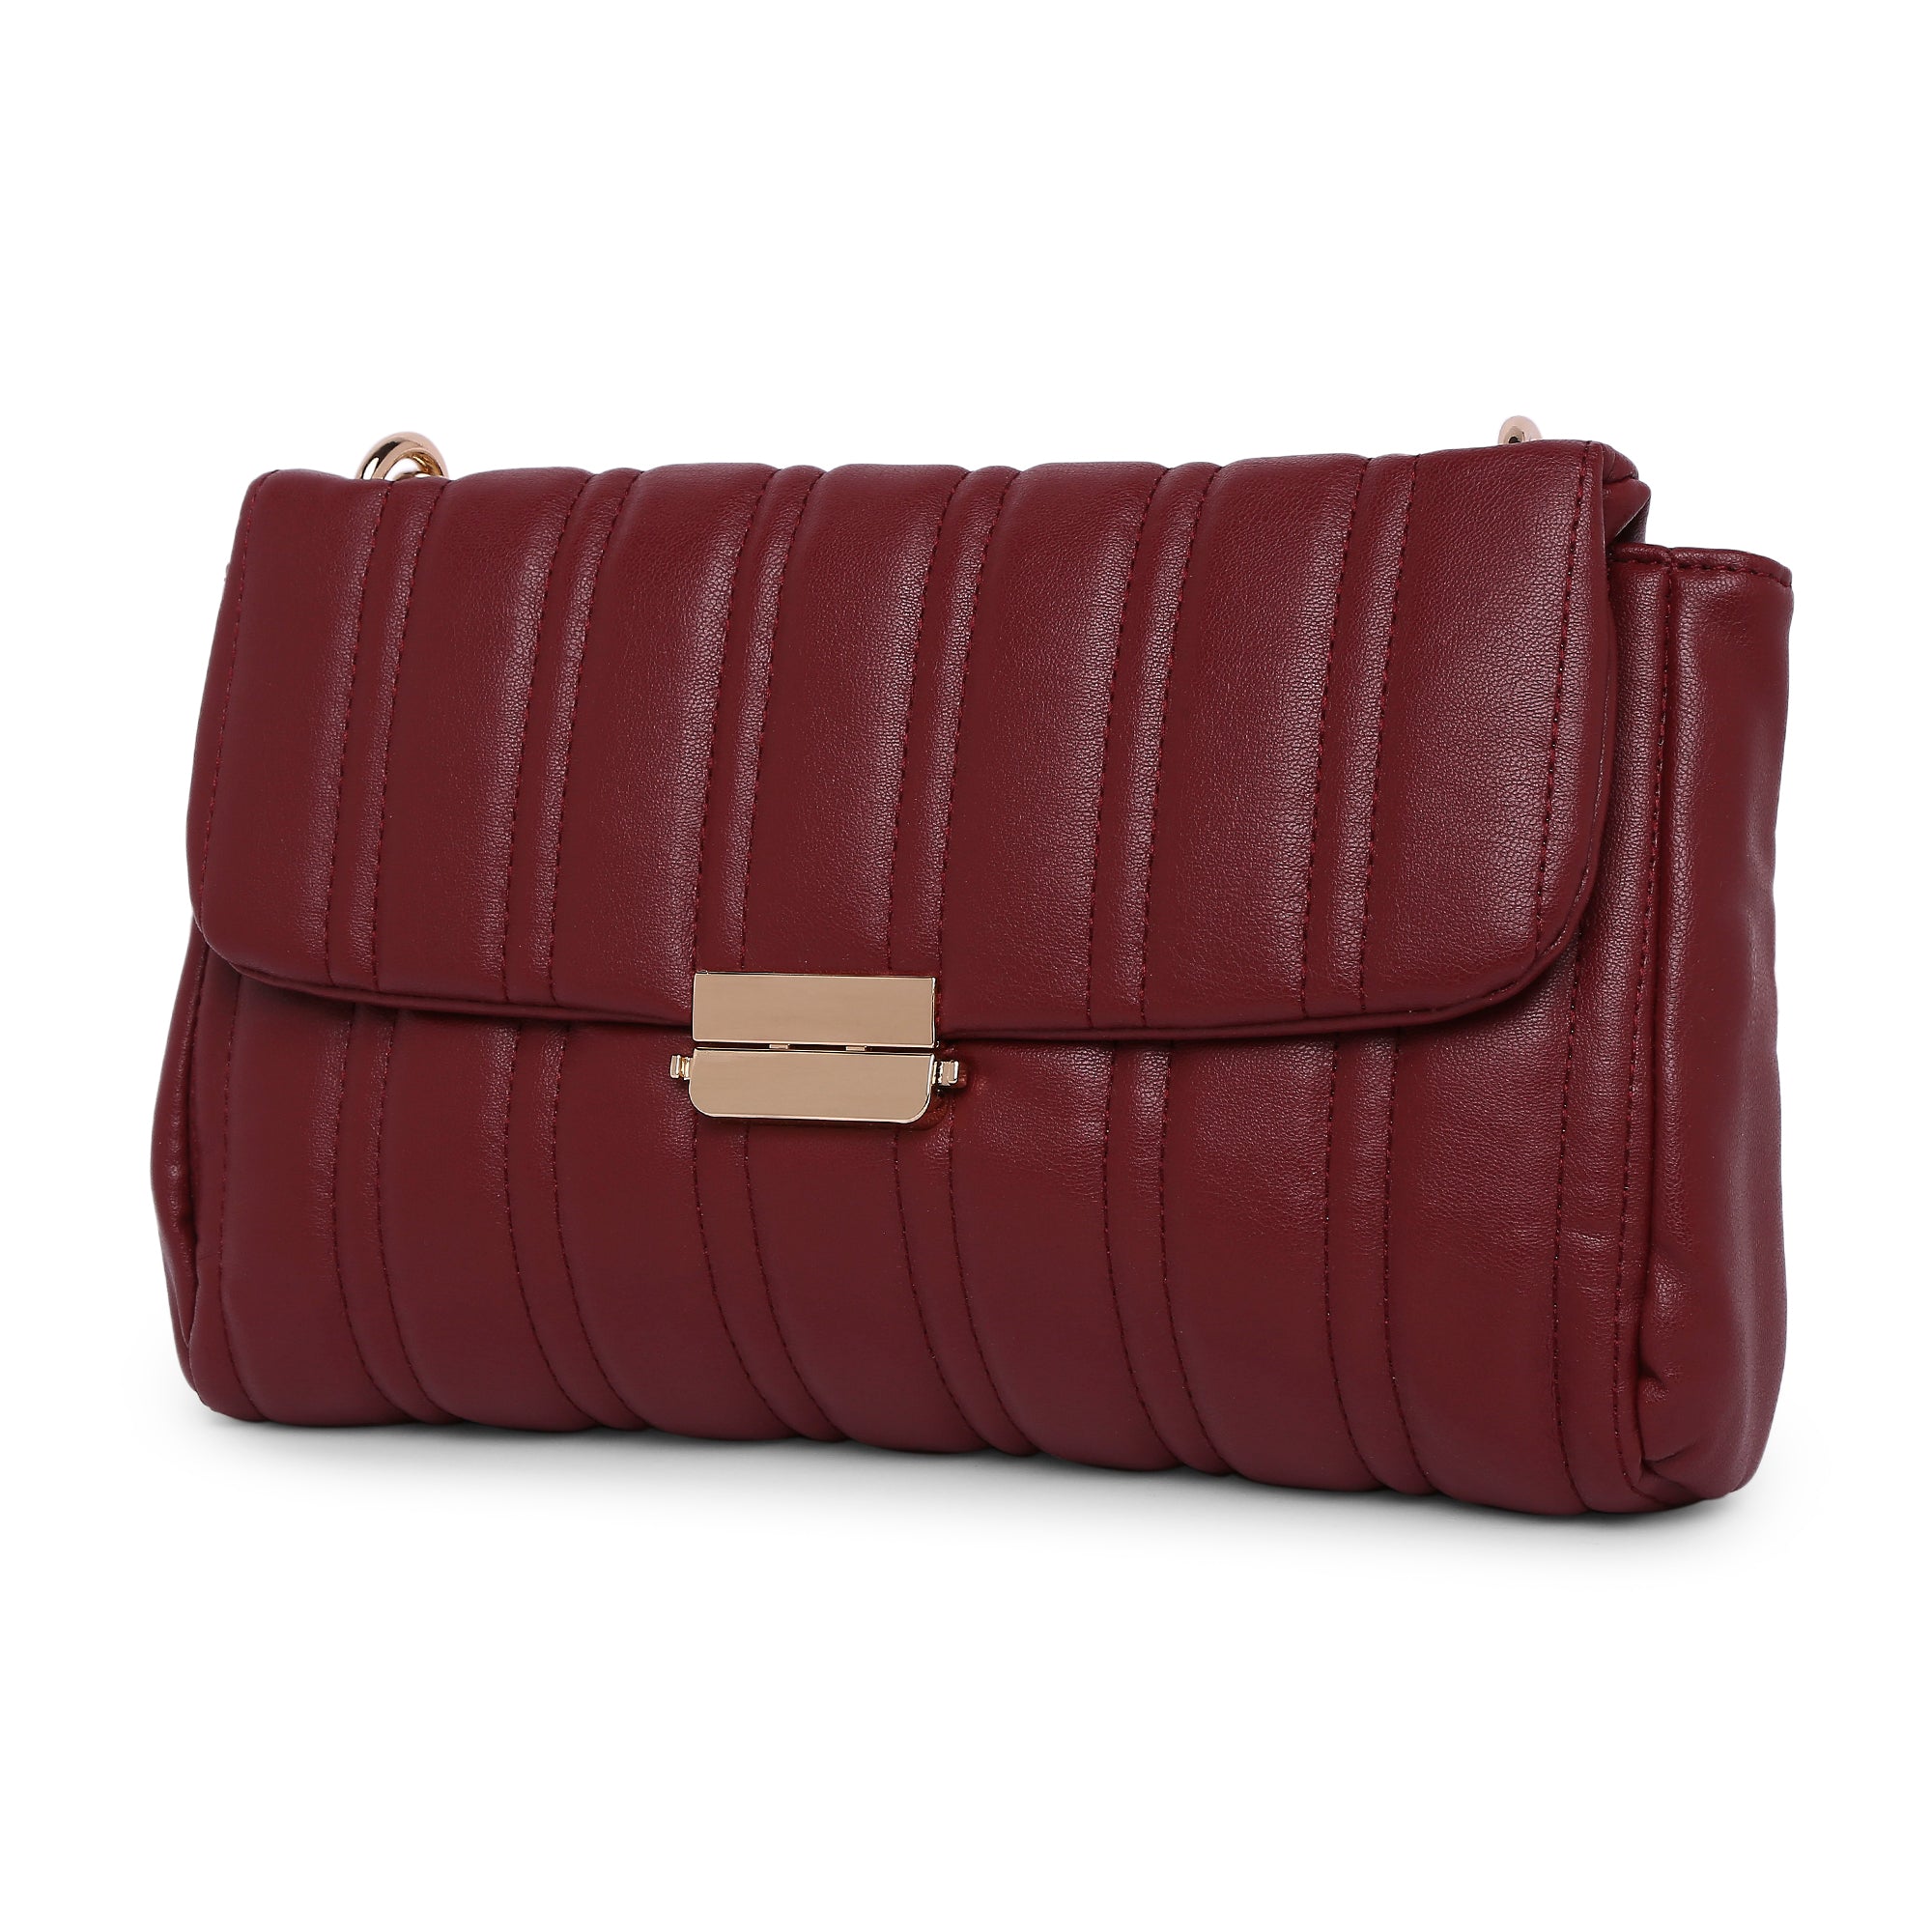 Accessorize London Women's Faux Leather Maroon Carrie Chain Quilt Sling Bag